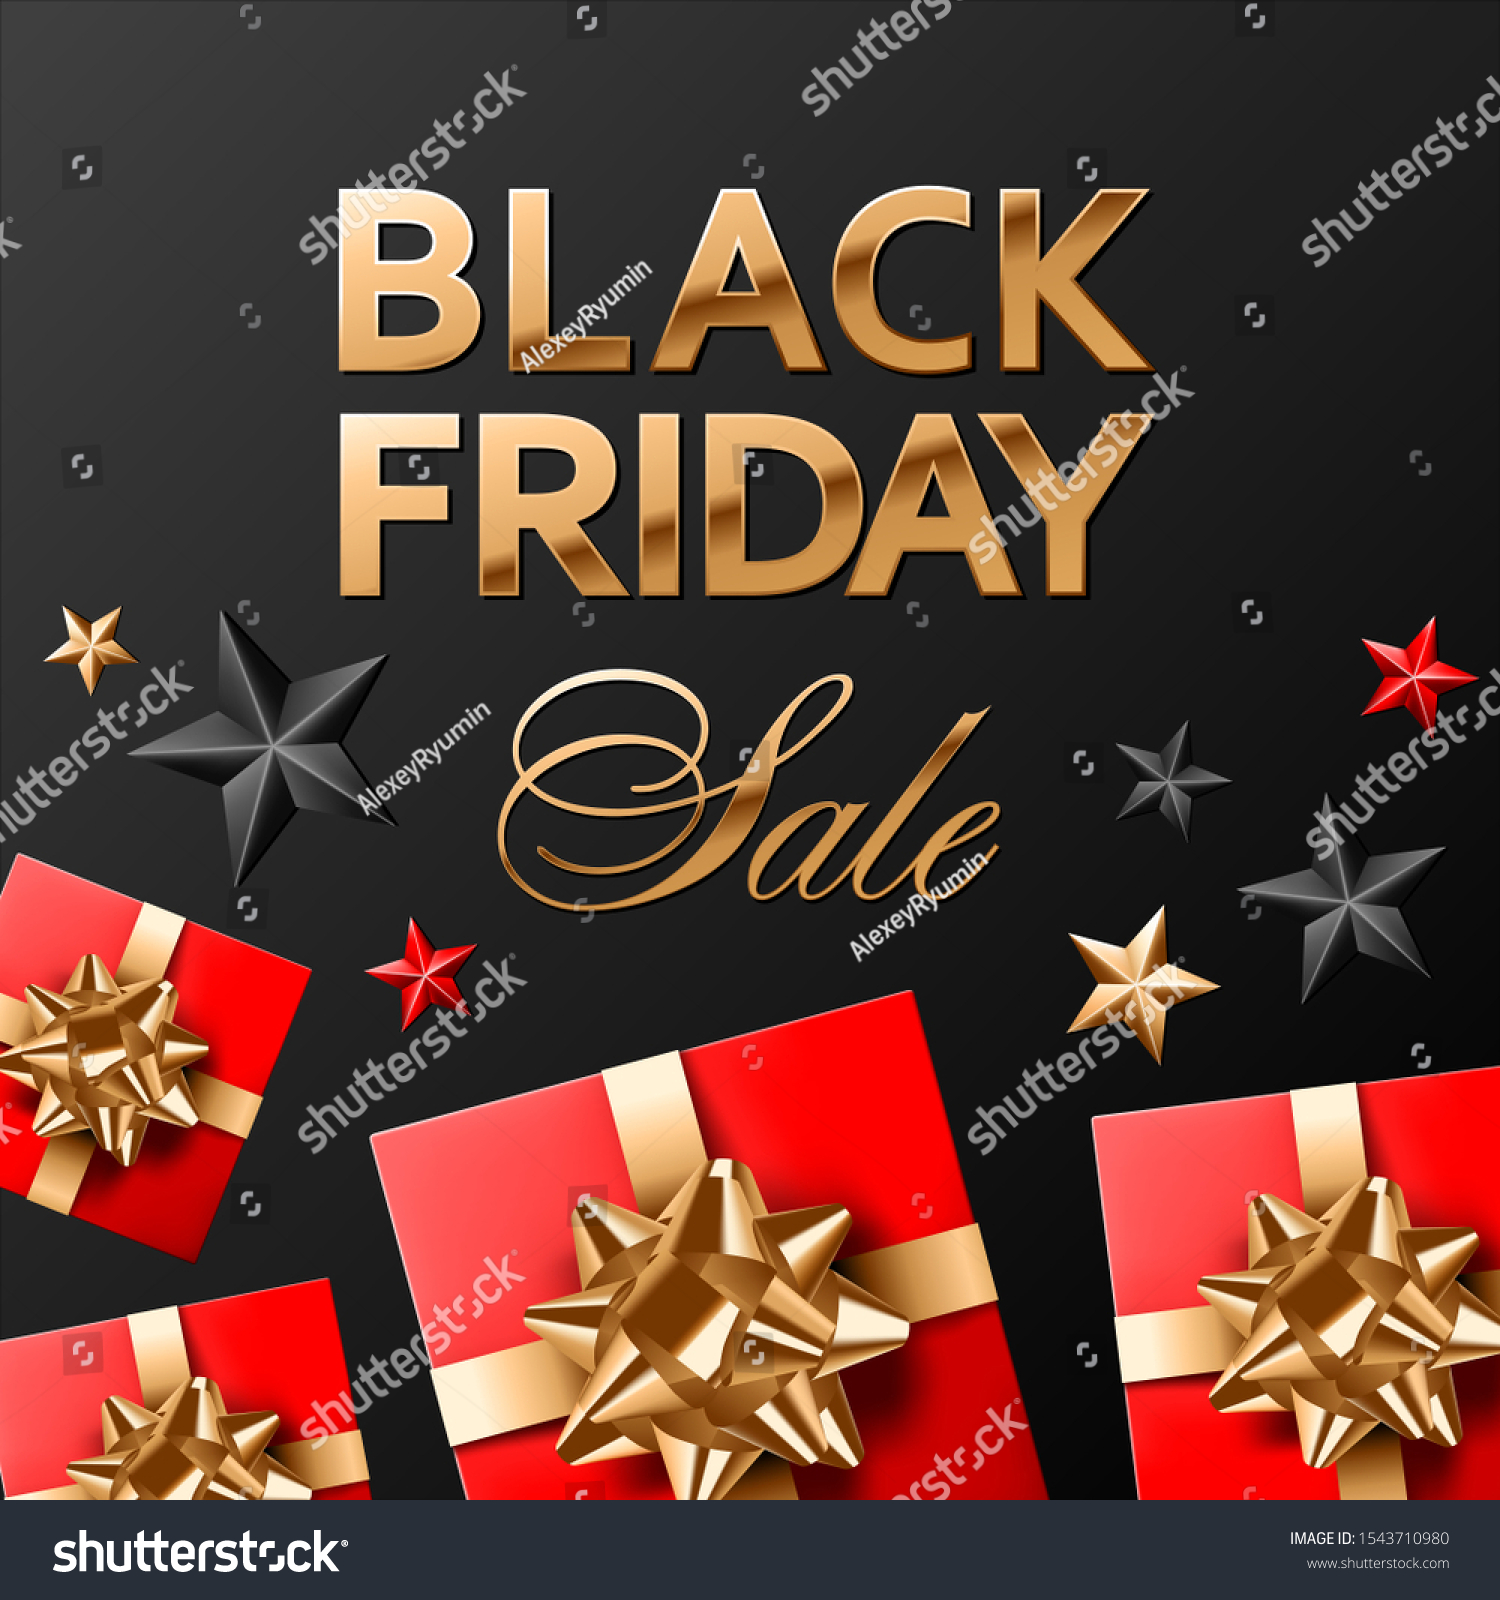 Black friday sale vector golden lettering on black background with red, gold and black stars and red covered gifts with golden bows. Square social media post or banner template.
